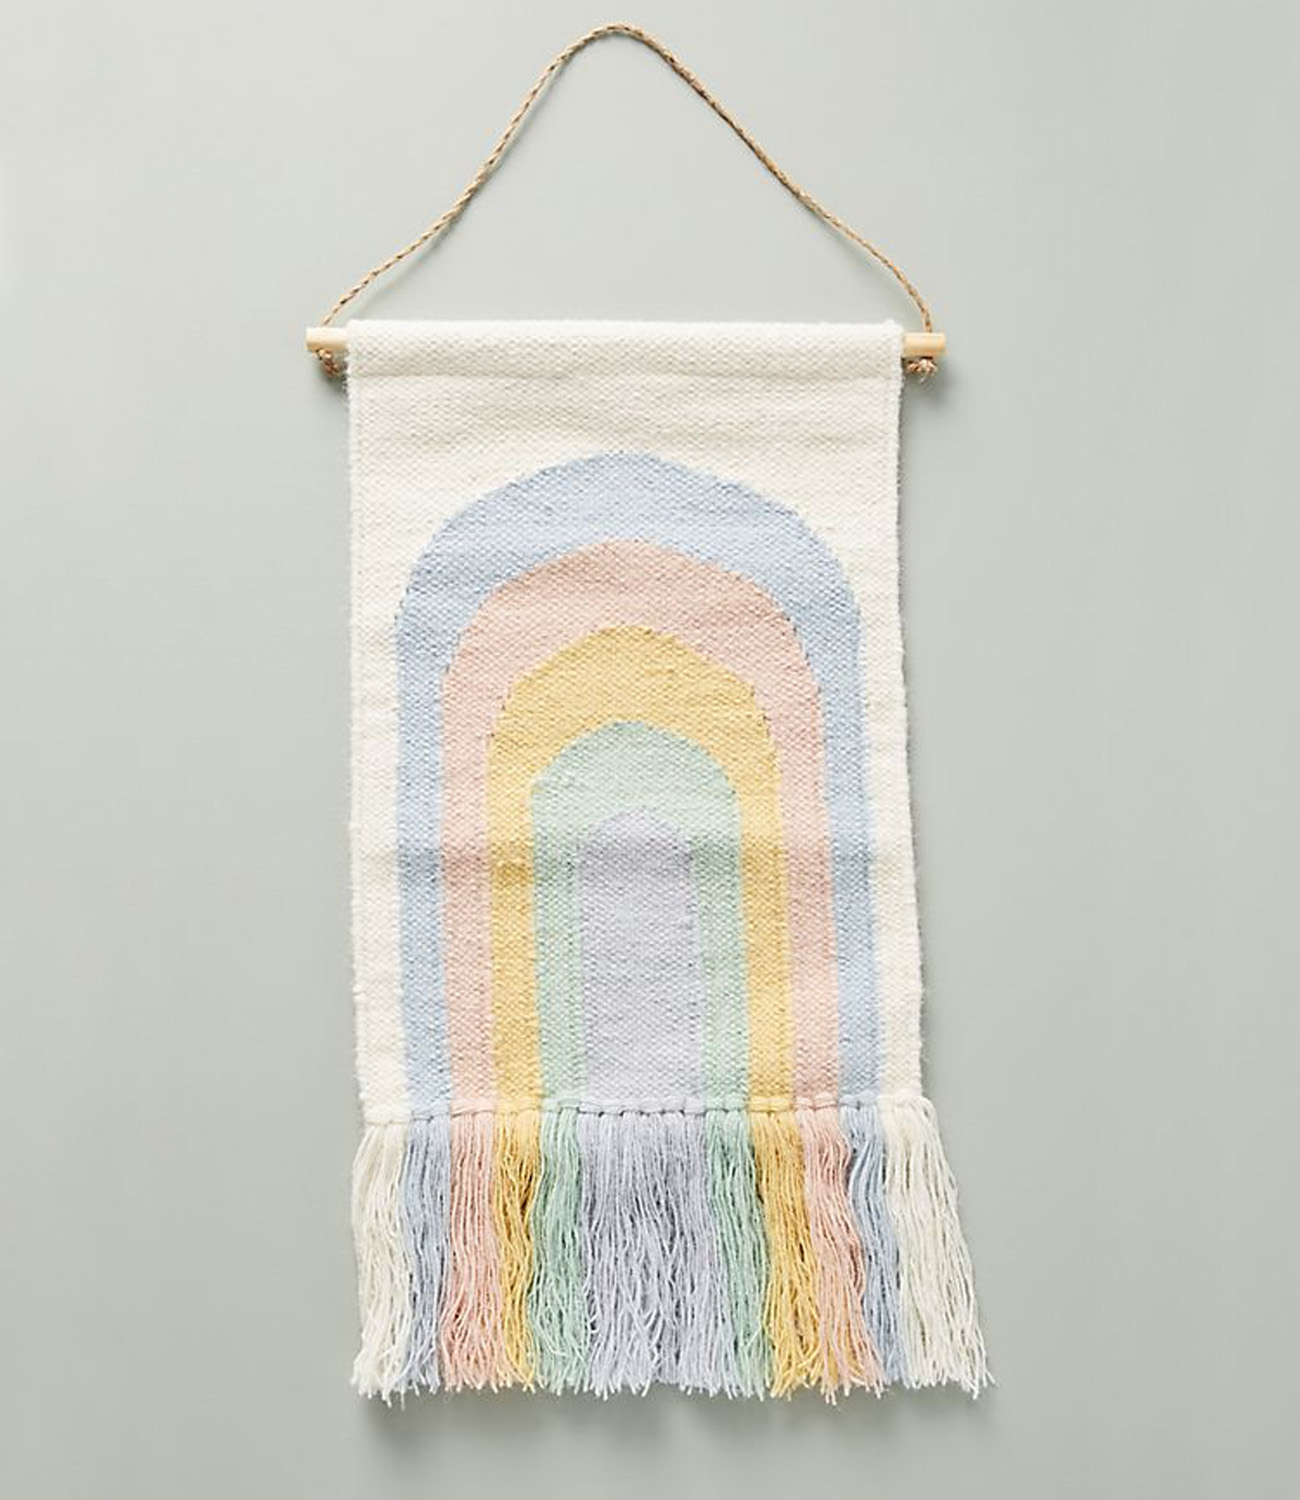 Boho Rainbow Wall Hanging from Anthropologie